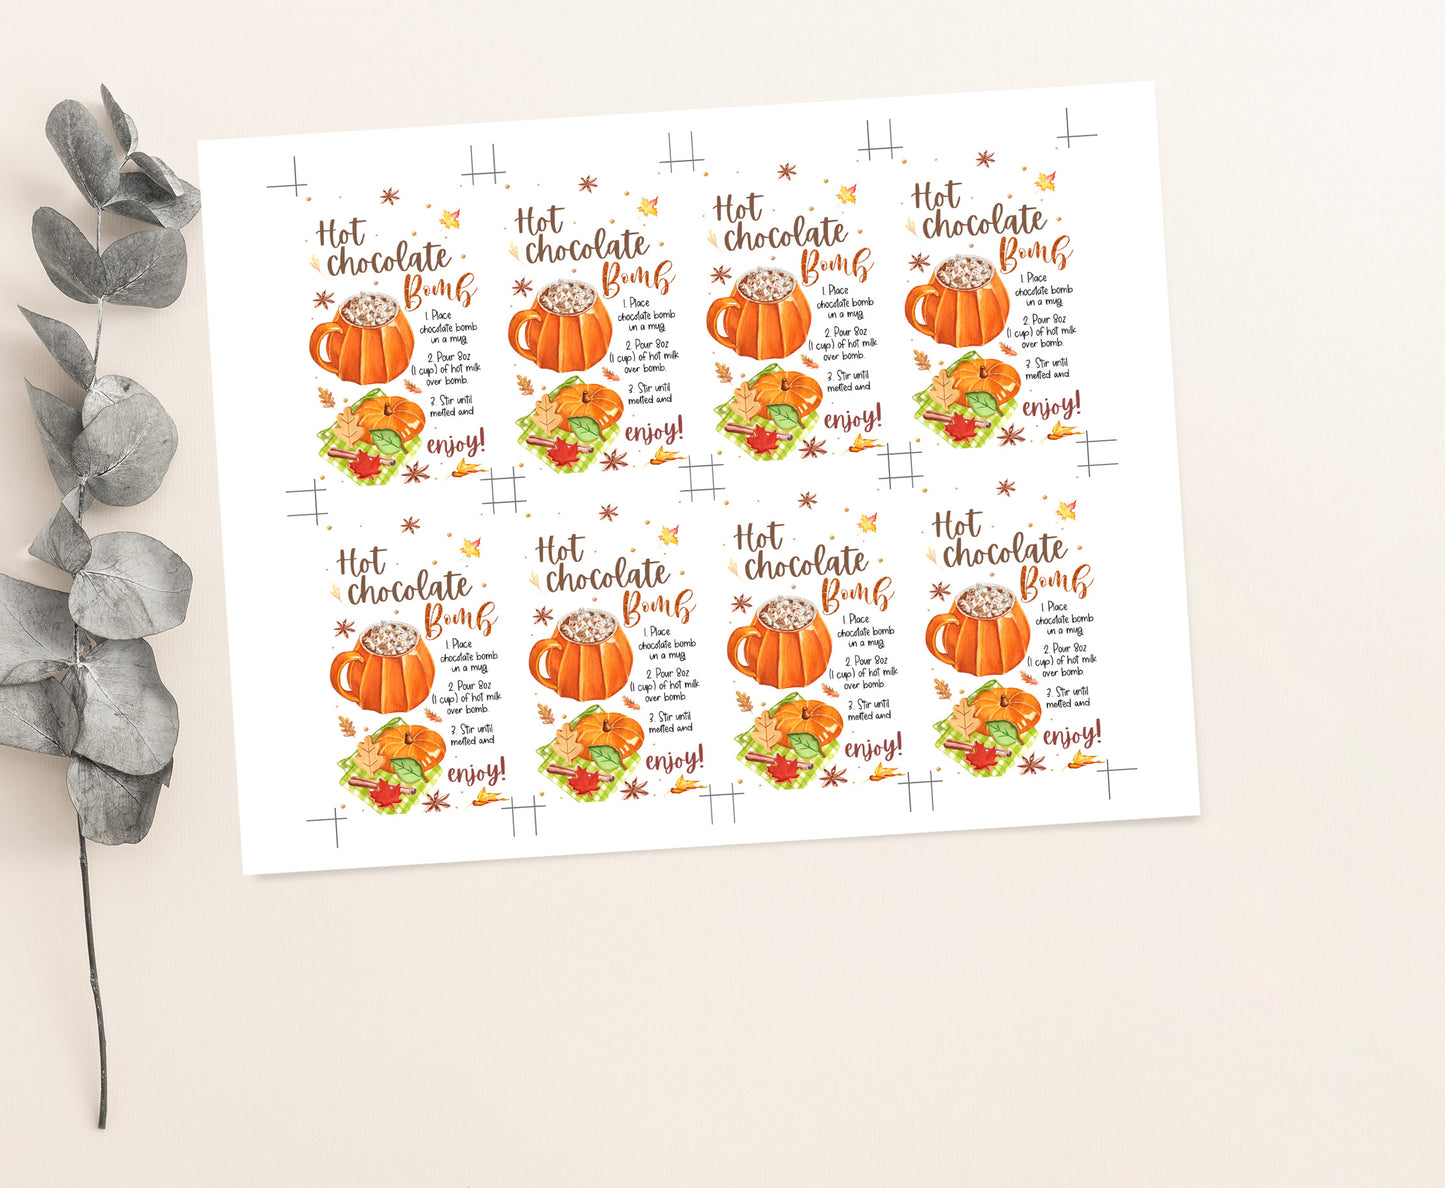 Hot Chocolate Bomb Inctructions Tags | Fall Favor Tags - 30